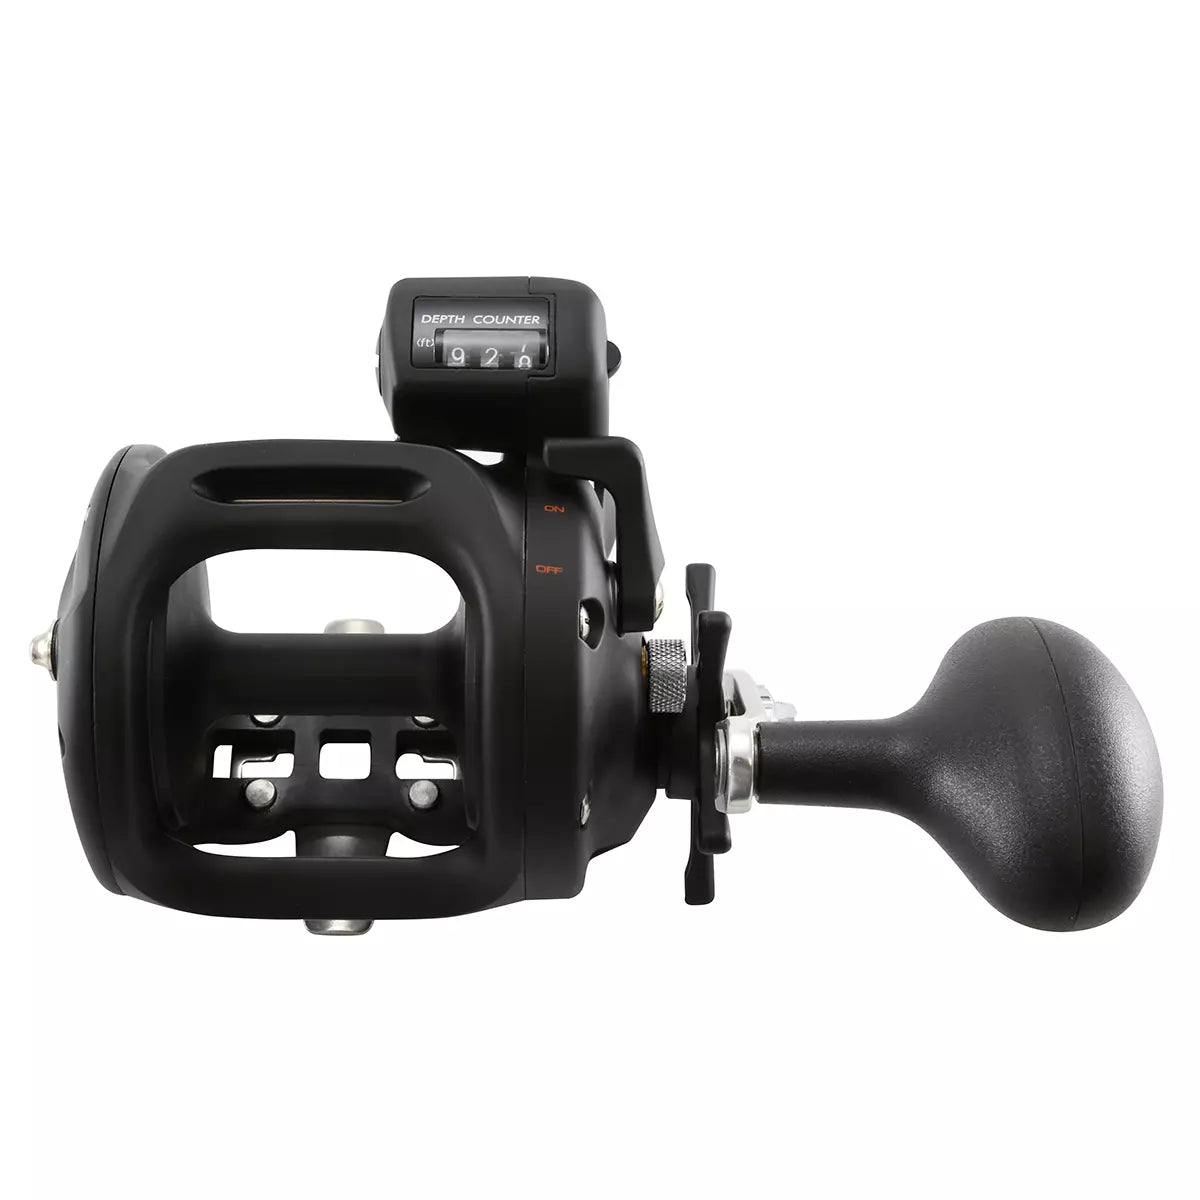 Magda Pro Line Counter Reel